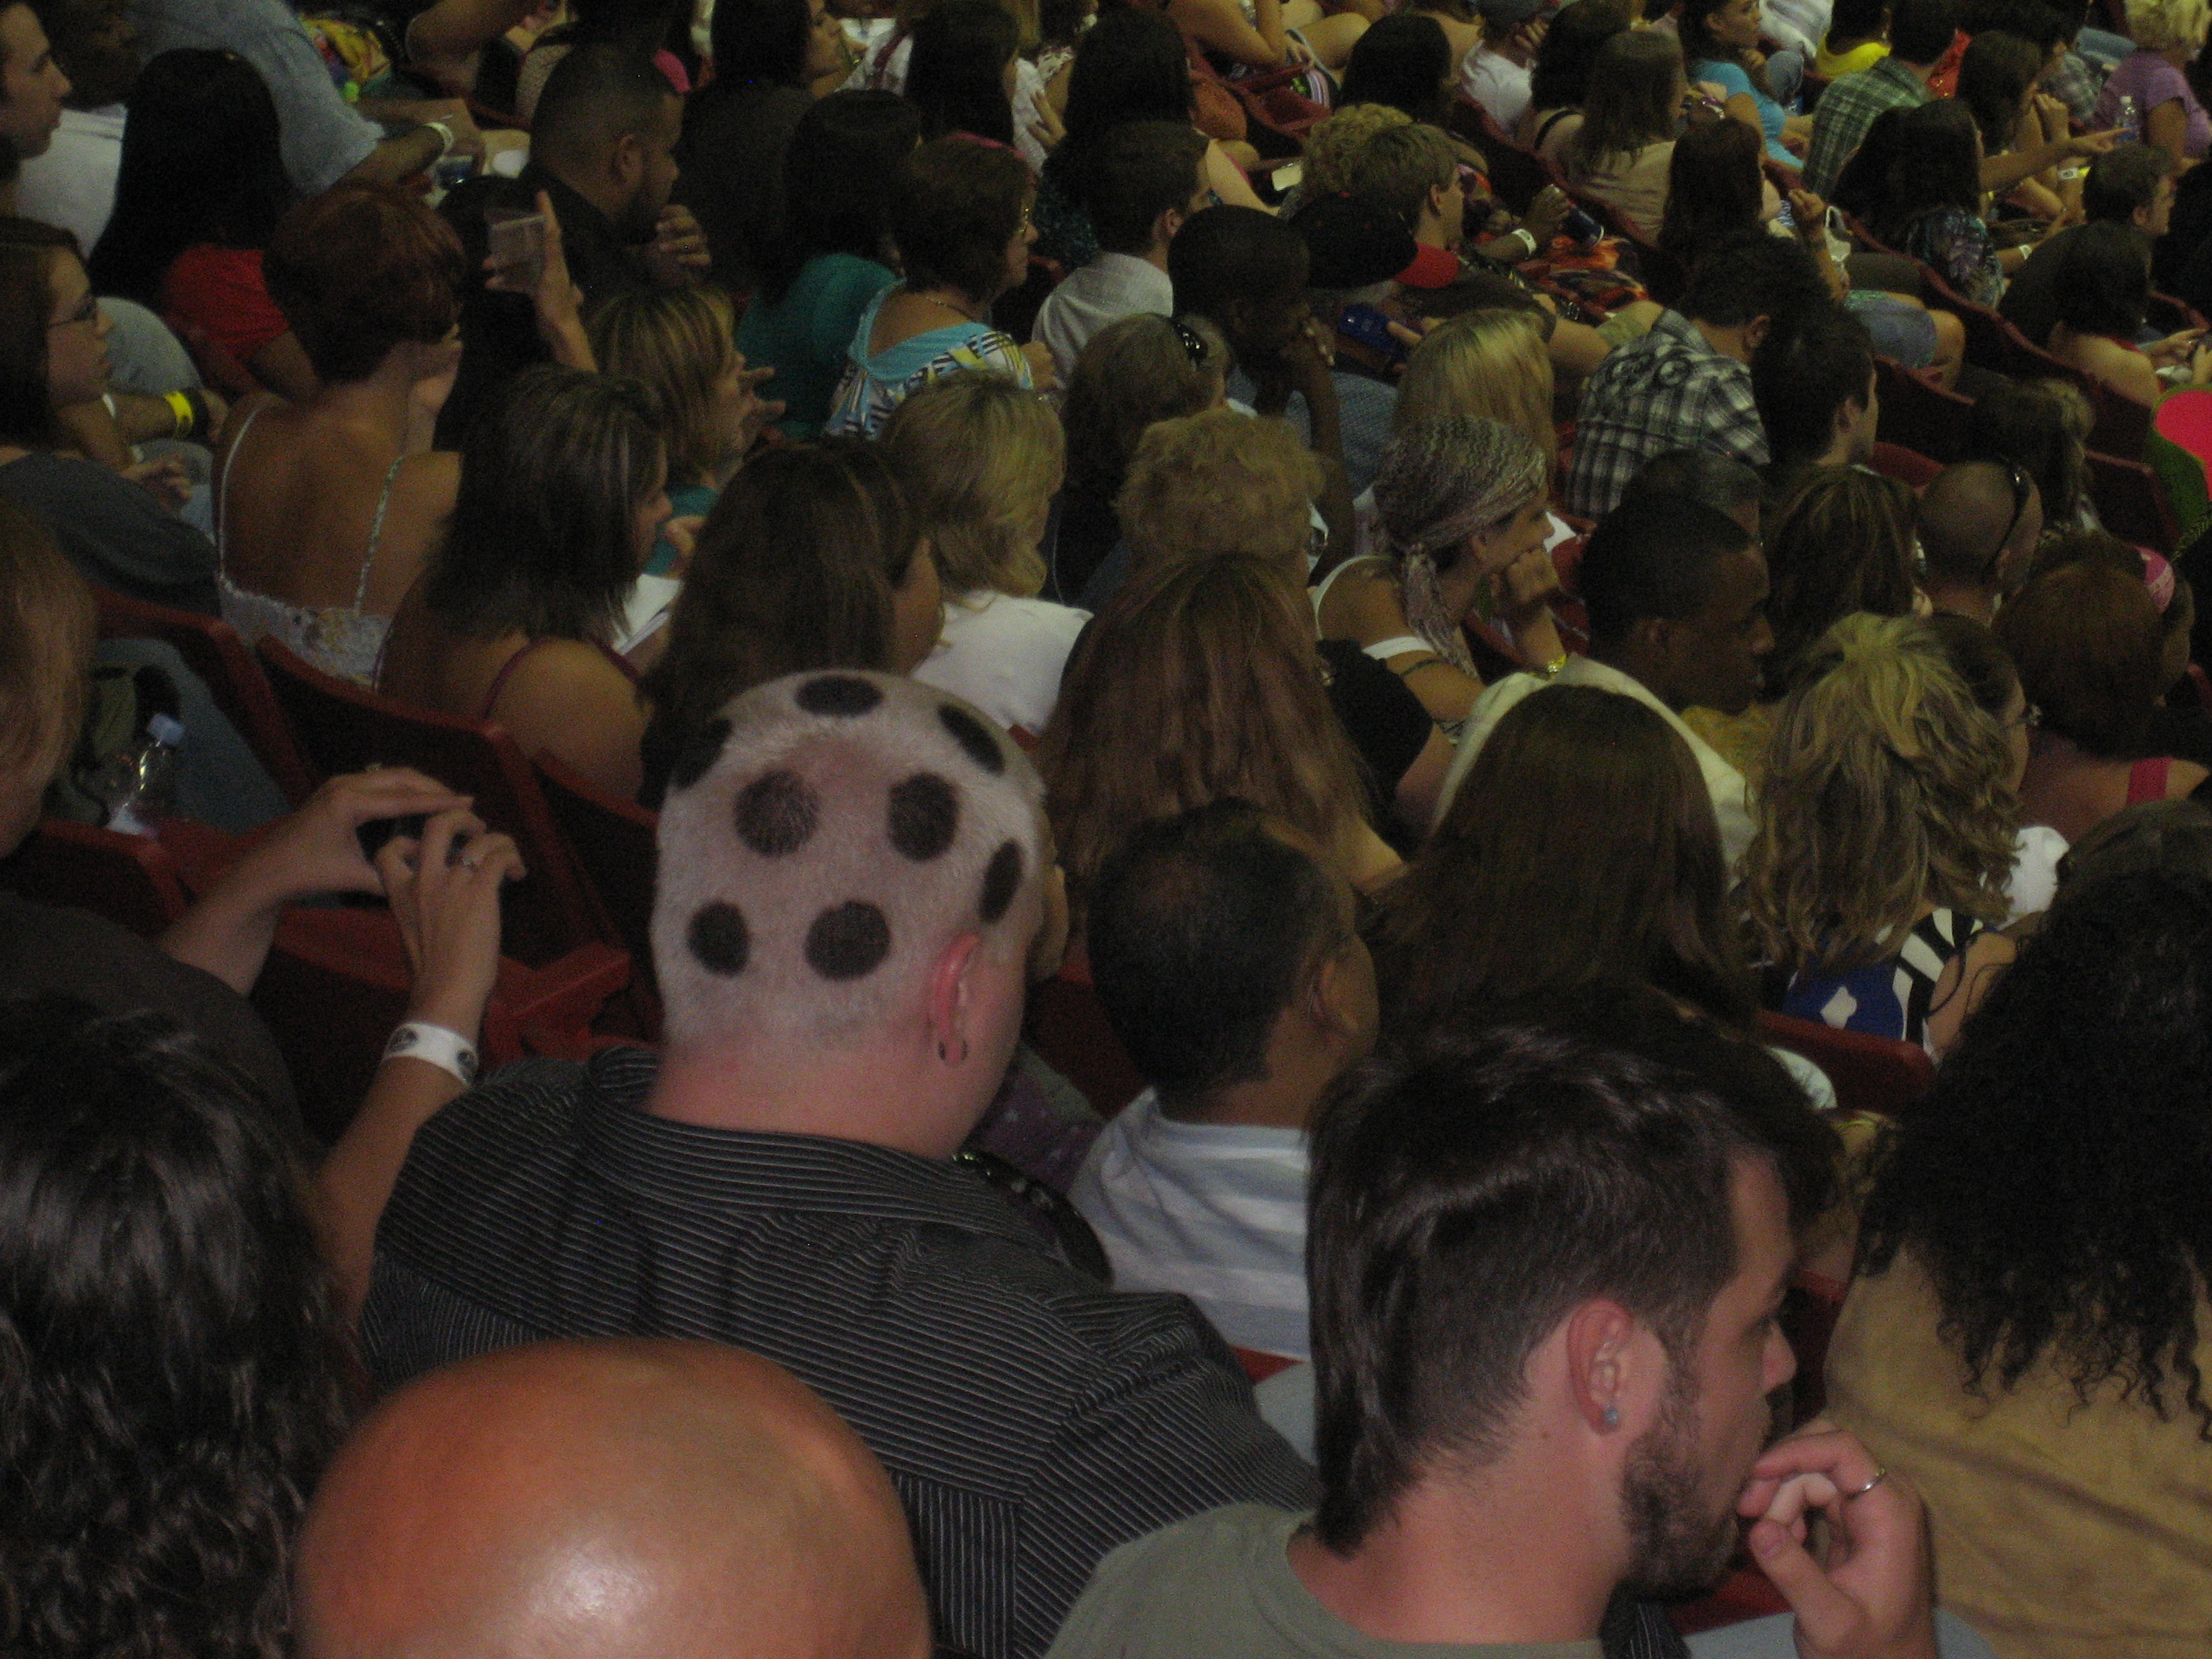 Polka dot head ranked amongst the attention-cravers (Day 3 pic)